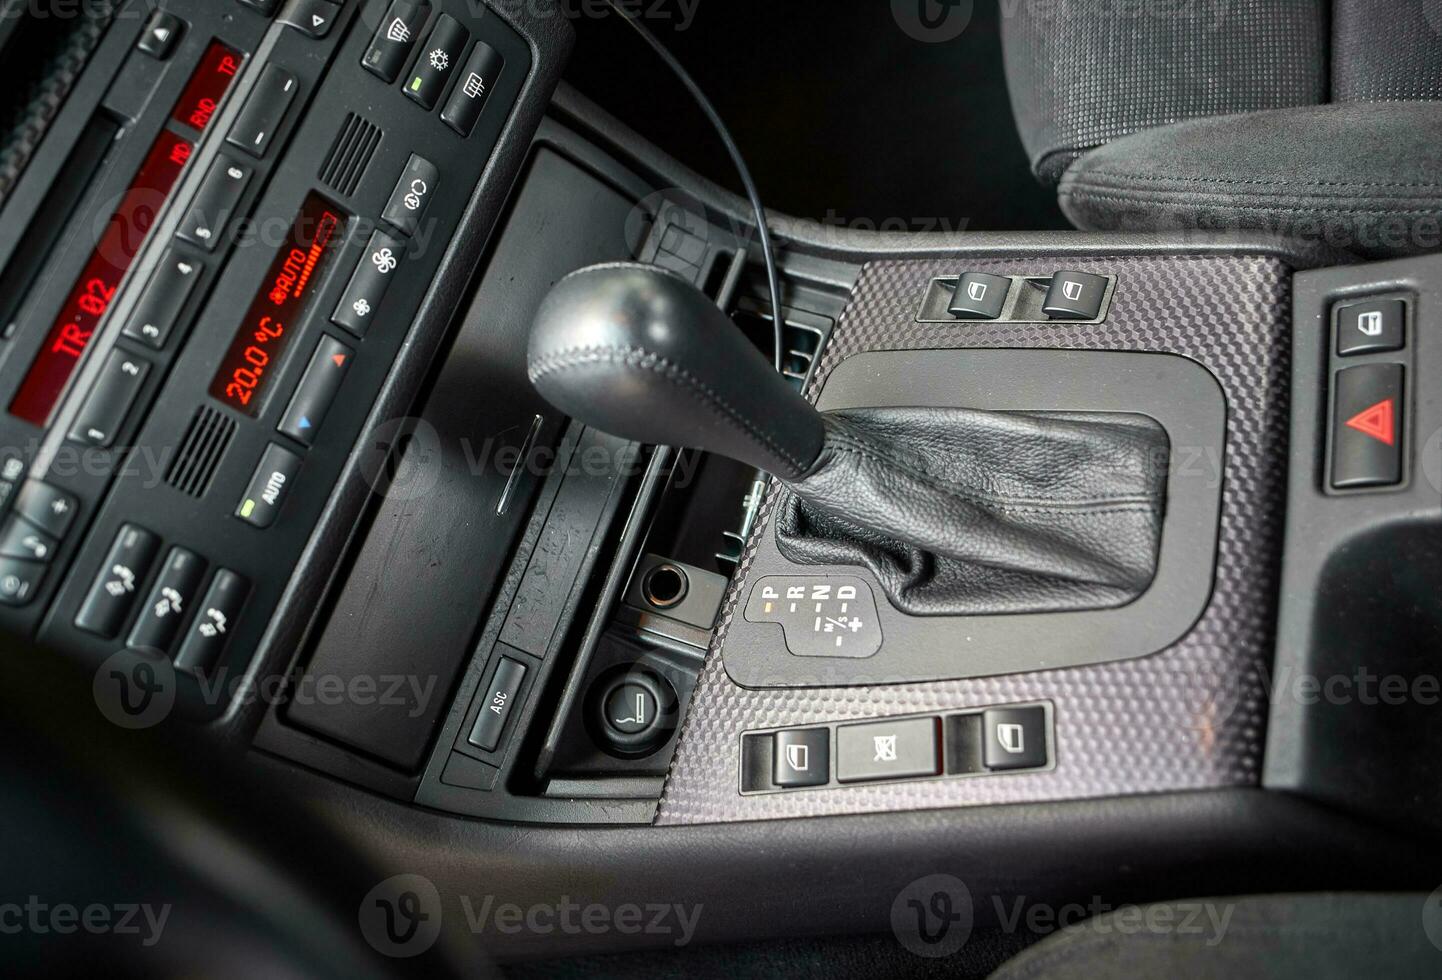 Shift lever, car steering wheel and sensors. Inside a modern car view, city car interior background photo